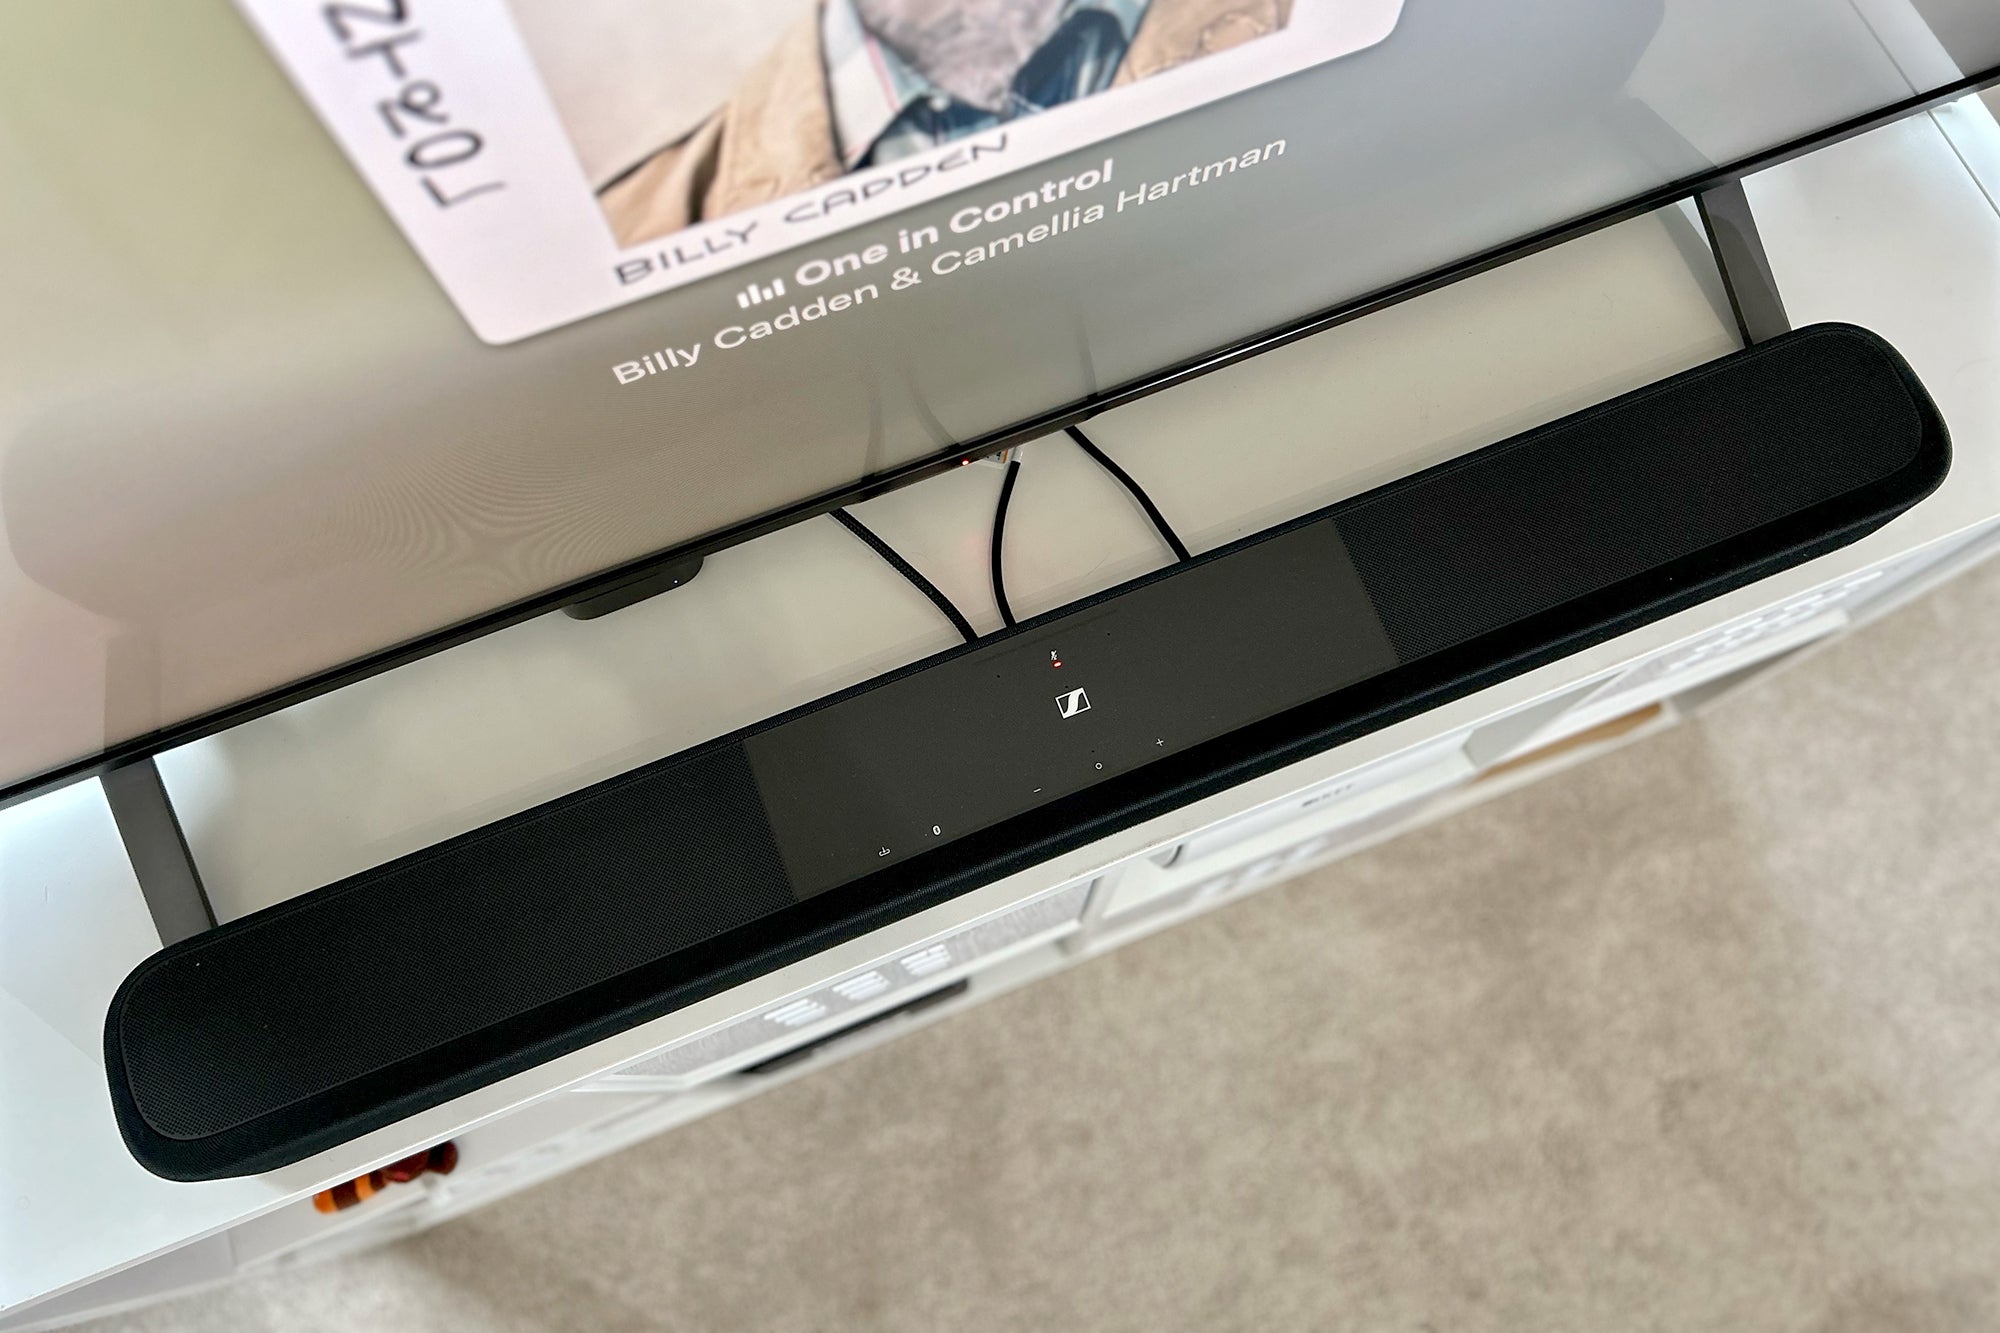 Sennheiser AMBEO Plus best overall soundbar in front of a TV playing Billy Cadden